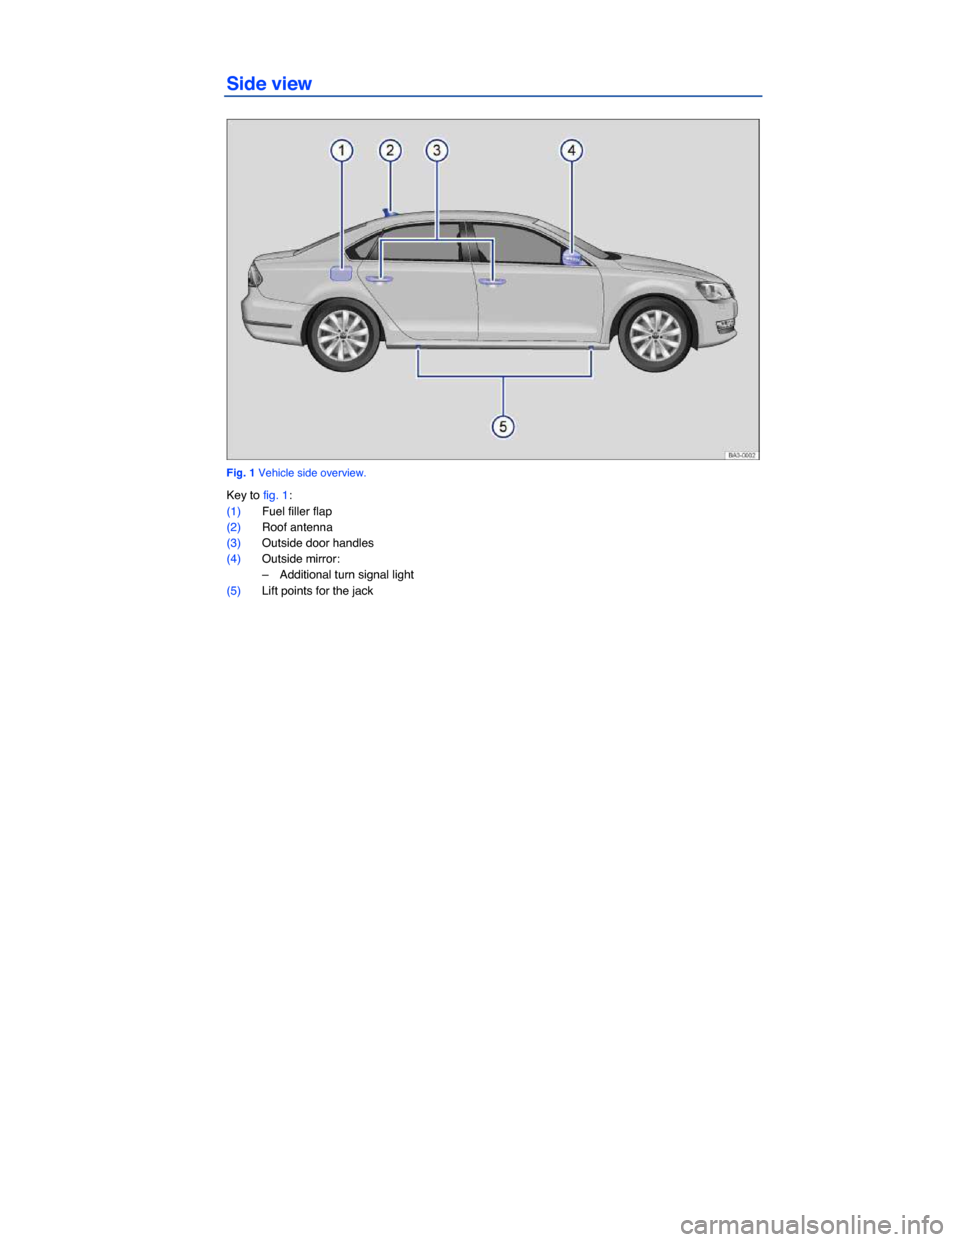 VOLKSWAGEN PASSAT 2015 B8 / 6.G Owners Manual  
Side view 
 
Fig. 1 Vehicle side overview. 
Key to fig. 1: 
(1) Fuel filler flap  
(2) Roof antenna  
(3) Outside door handles  
(4) Outside mirror:  
–  Additional turn signal light  
(5) Lift po